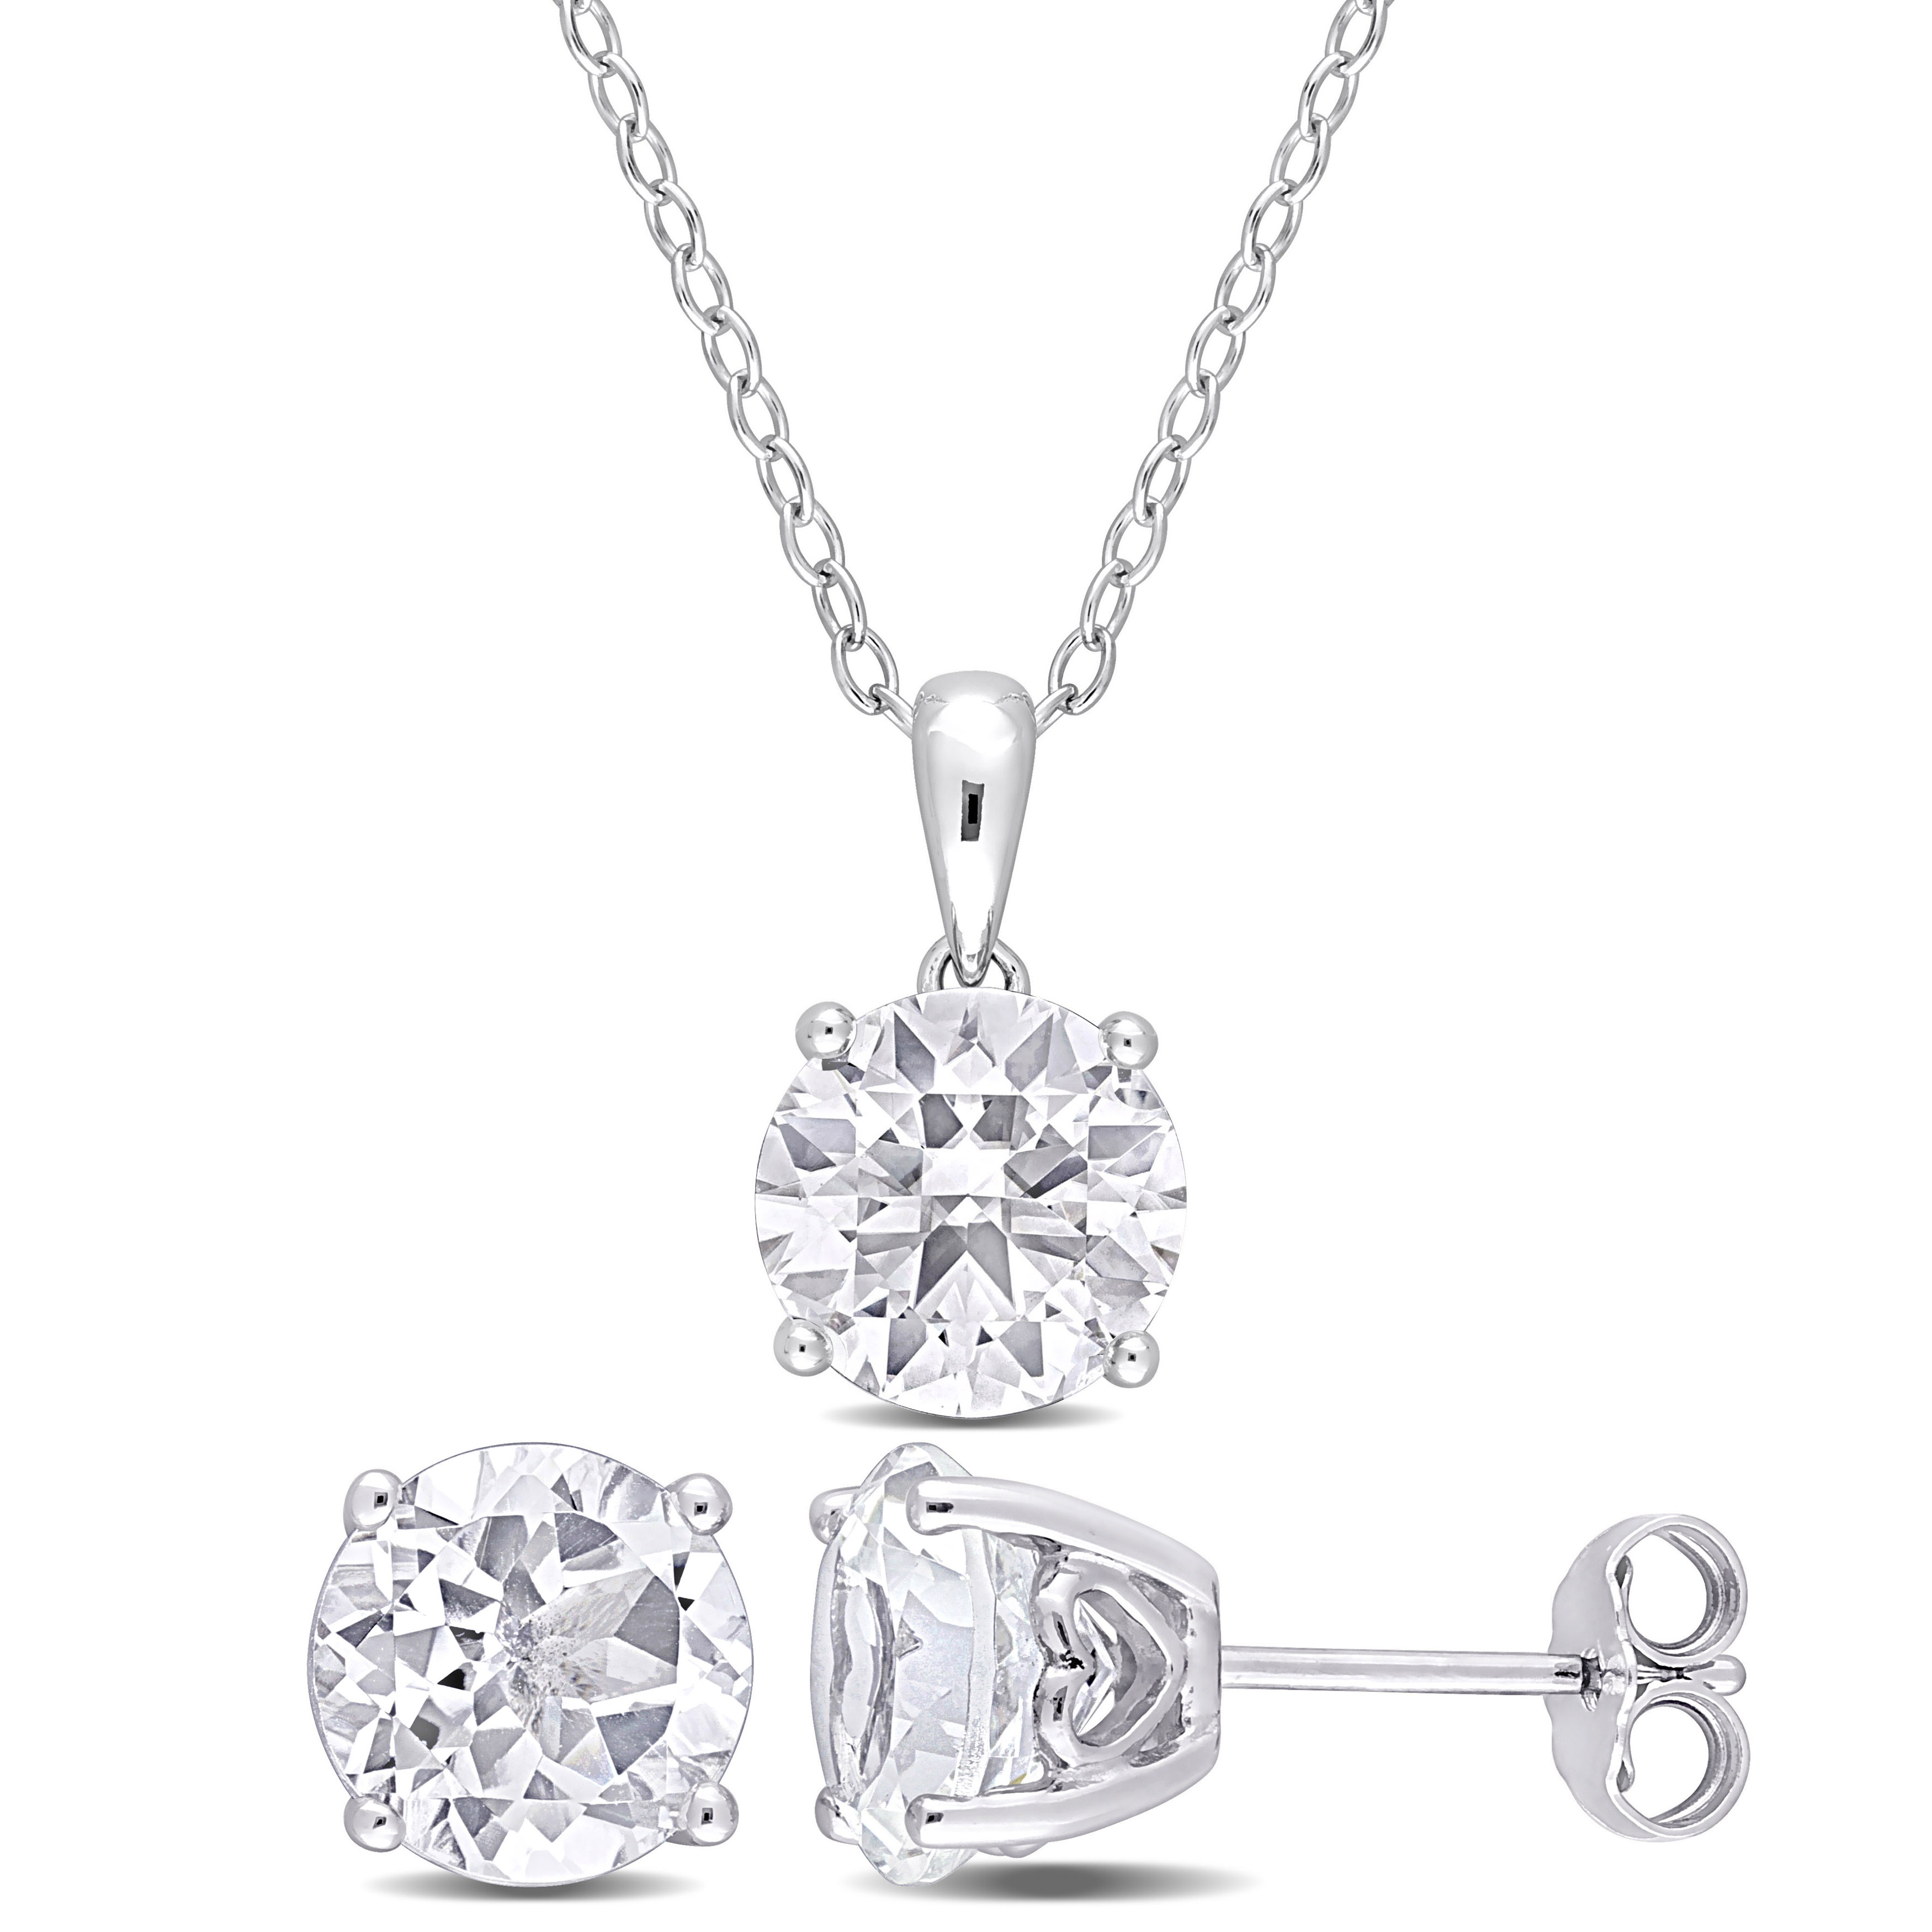 7 CT TGW White Topaz 2-Piece Set of Pendant with Chain and Earrings in Sterling Silver